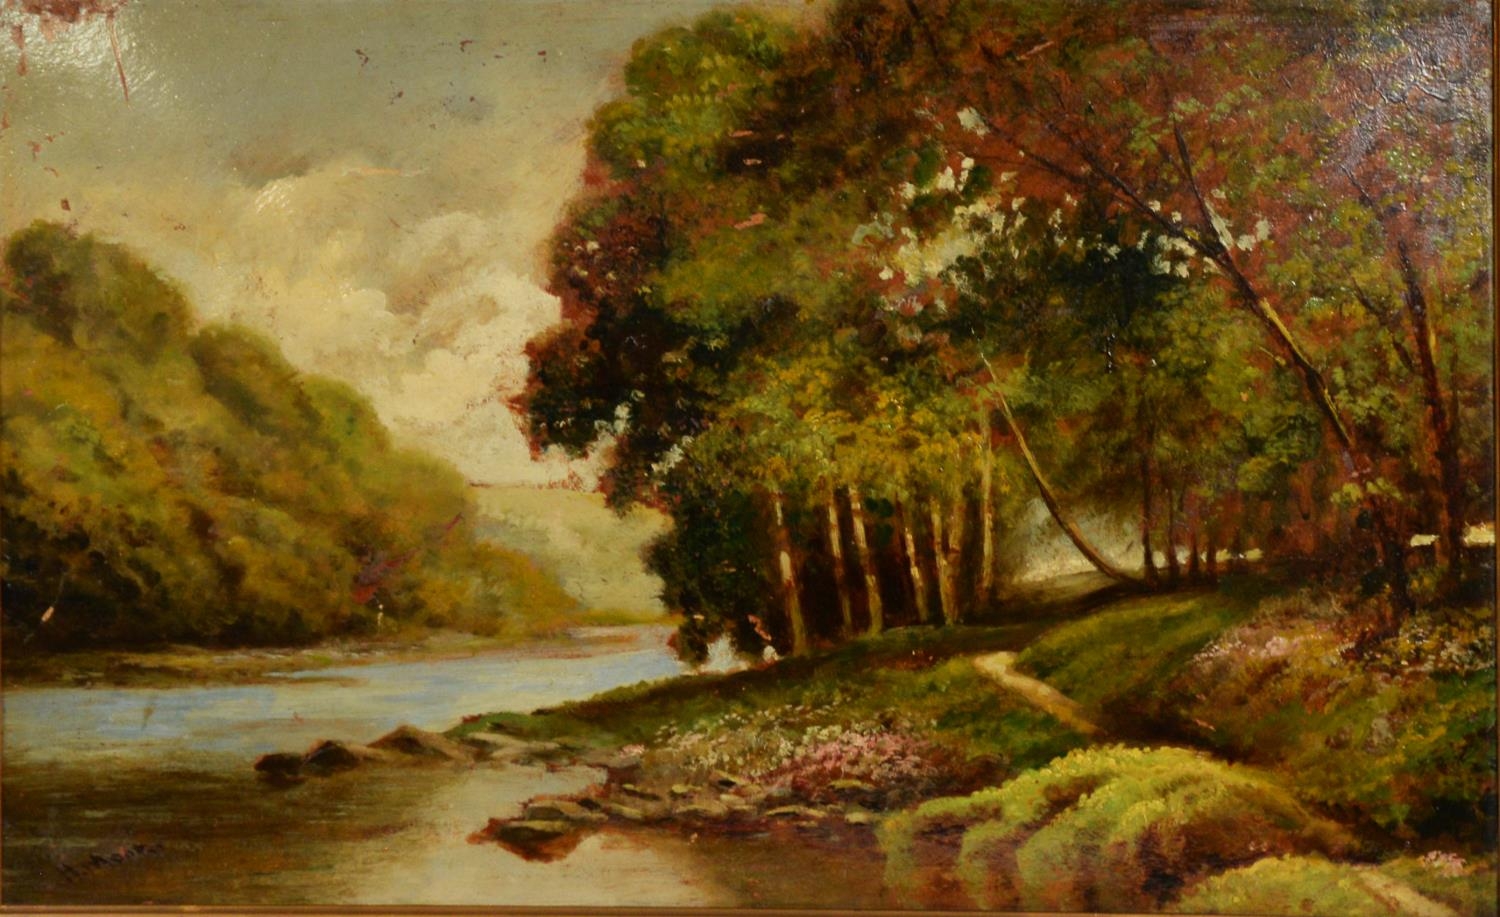 19th CENTURY ENGLISH SCHOOL PAIR OF OILS ON CANVAS Landscapes 15 1/2in x 24 1/2in (39.3 x 62.2cm) - Image 2 of 12